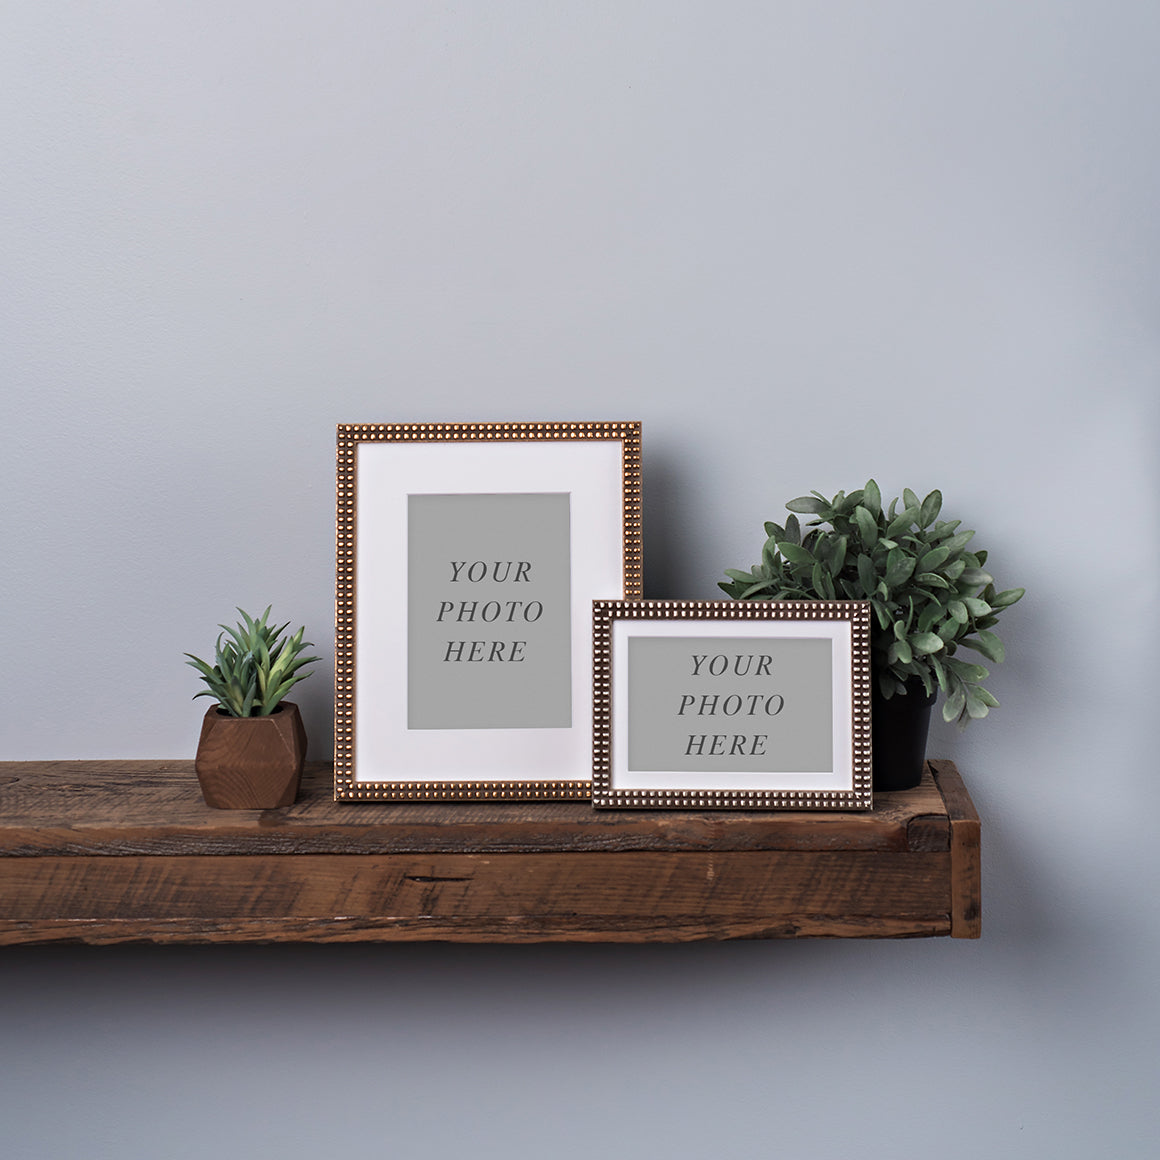 Download Multiple Frame Mockup Stock Photo Template for Pro Photographers - Design Aglow